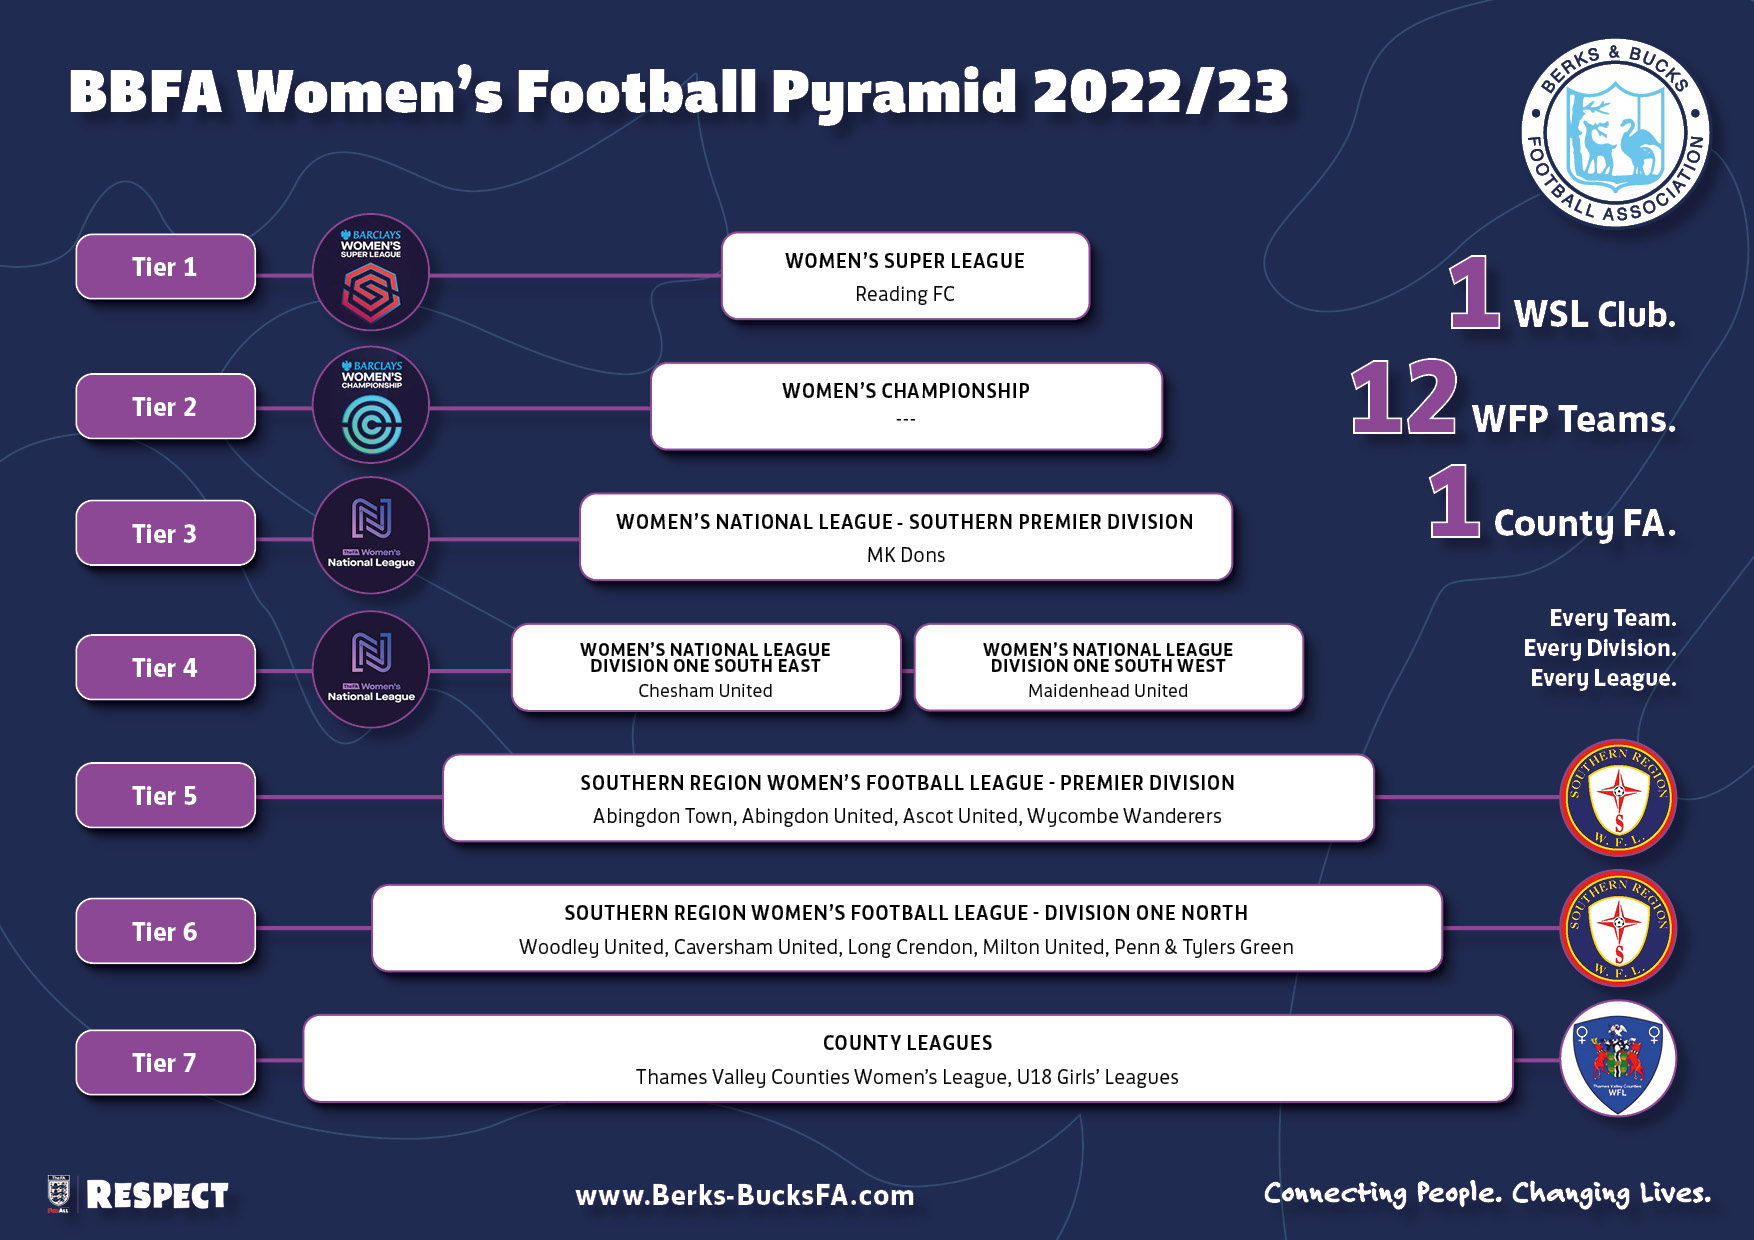 Every Berks & Bucks FA team in the every league and every division of the Women's Football Pyramid. Season 2022/23